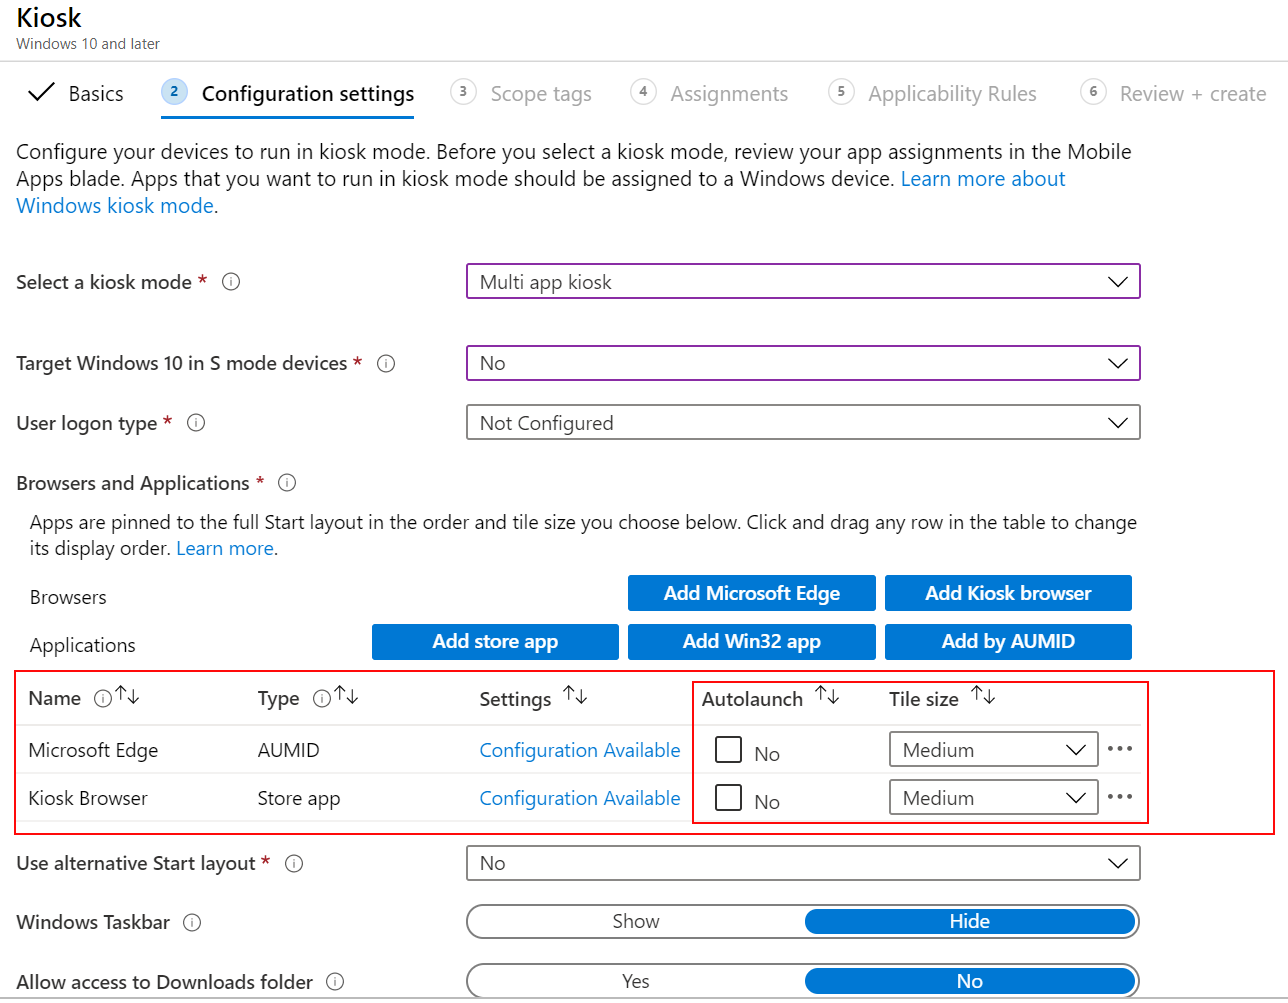 Automatically launch the app or browser, and select the tile size in a multi-app kiosk profile in Microsoft Intune.